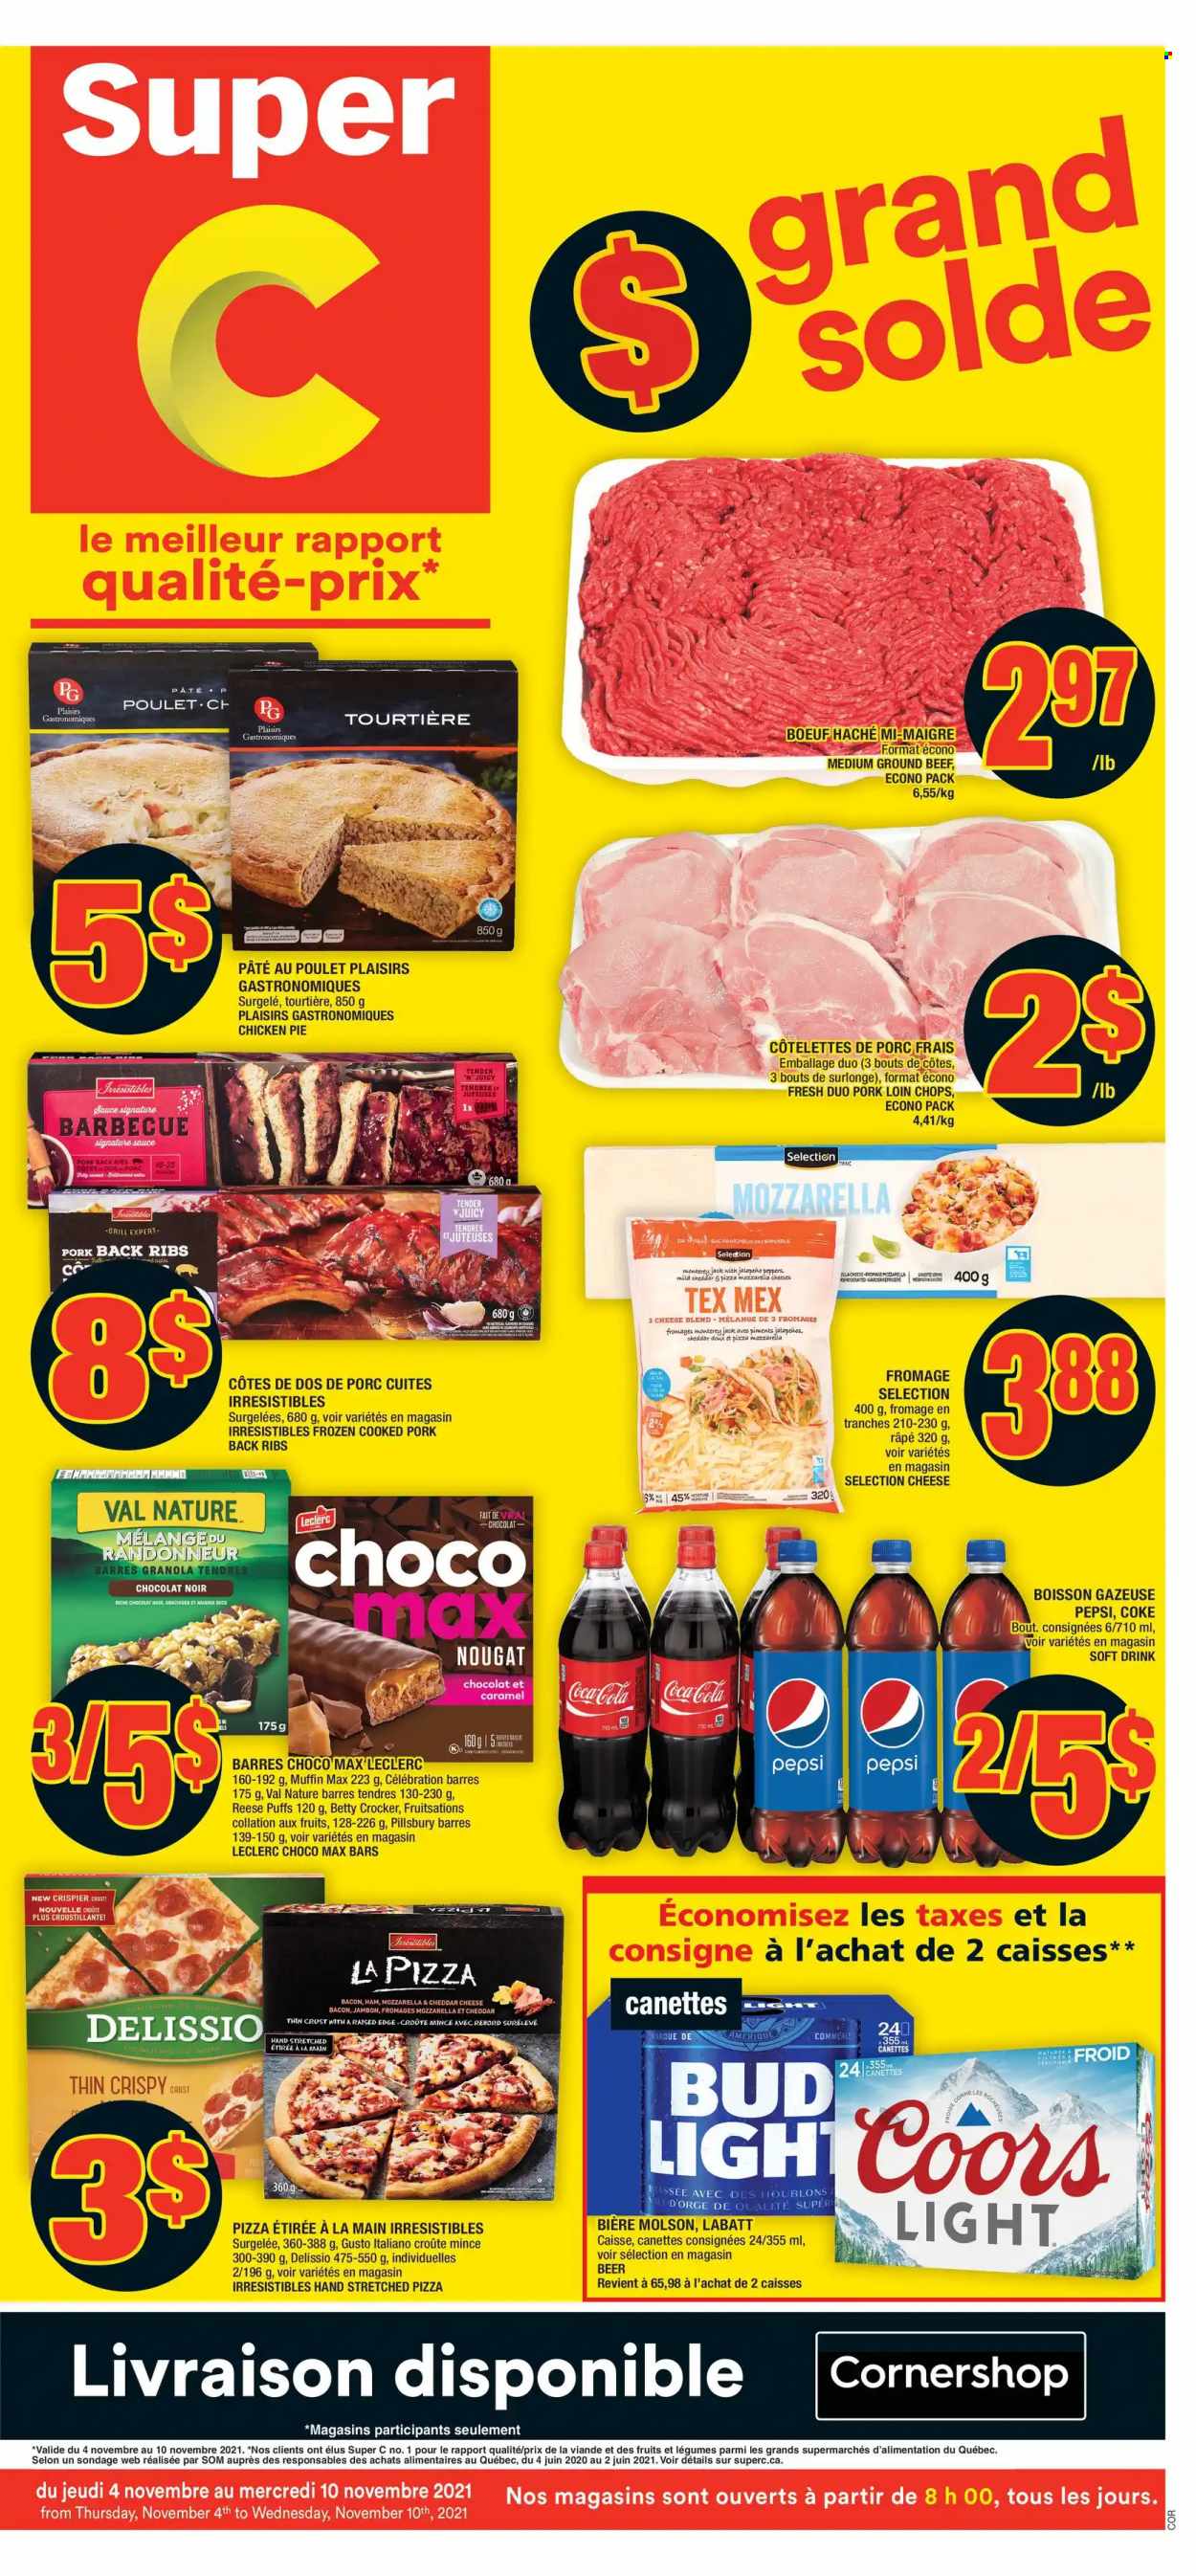 thumbnail - Super C Flyer - November 04, 2021 - November 10, 2021 - Sales products - pie, puffs, muffin, peppers, pizza, sauce, Pillsbury, bacon, ham, Monterey Jack cheese, Celebration, caramel, dried fruit, Coca-Cola, Pepsi, soft drink, beer, beef meat, ground beef, pork chops, pork loin, pork meat, pork ribs, pork back ribs, granola, raisins, nougat, Coors. Page 1.